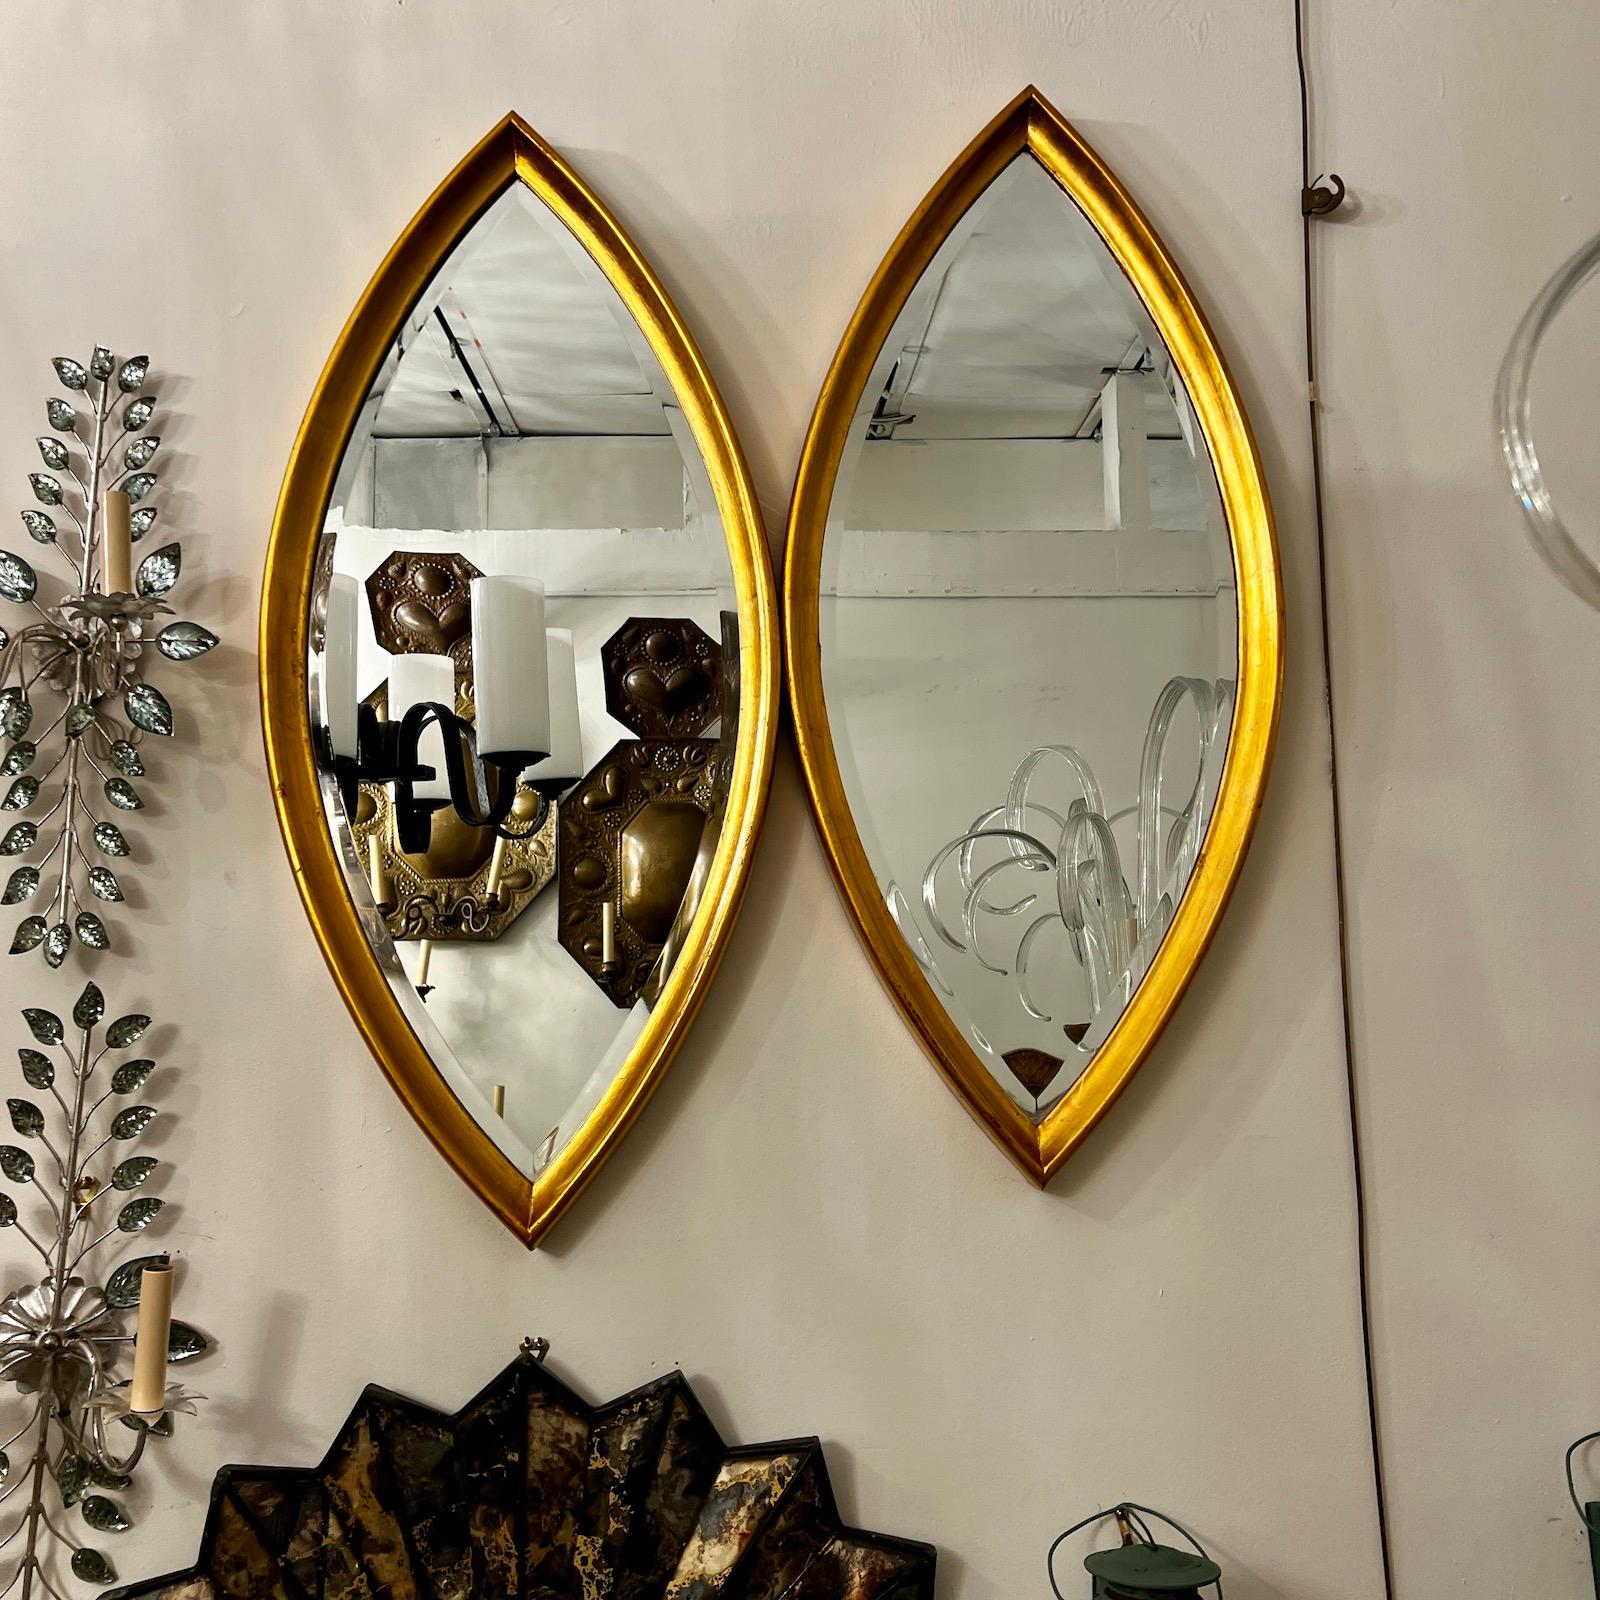 A pair of circa in 1950's gilt wood mirrors with original patina. Sold individually.

Measurements:
Length: 40